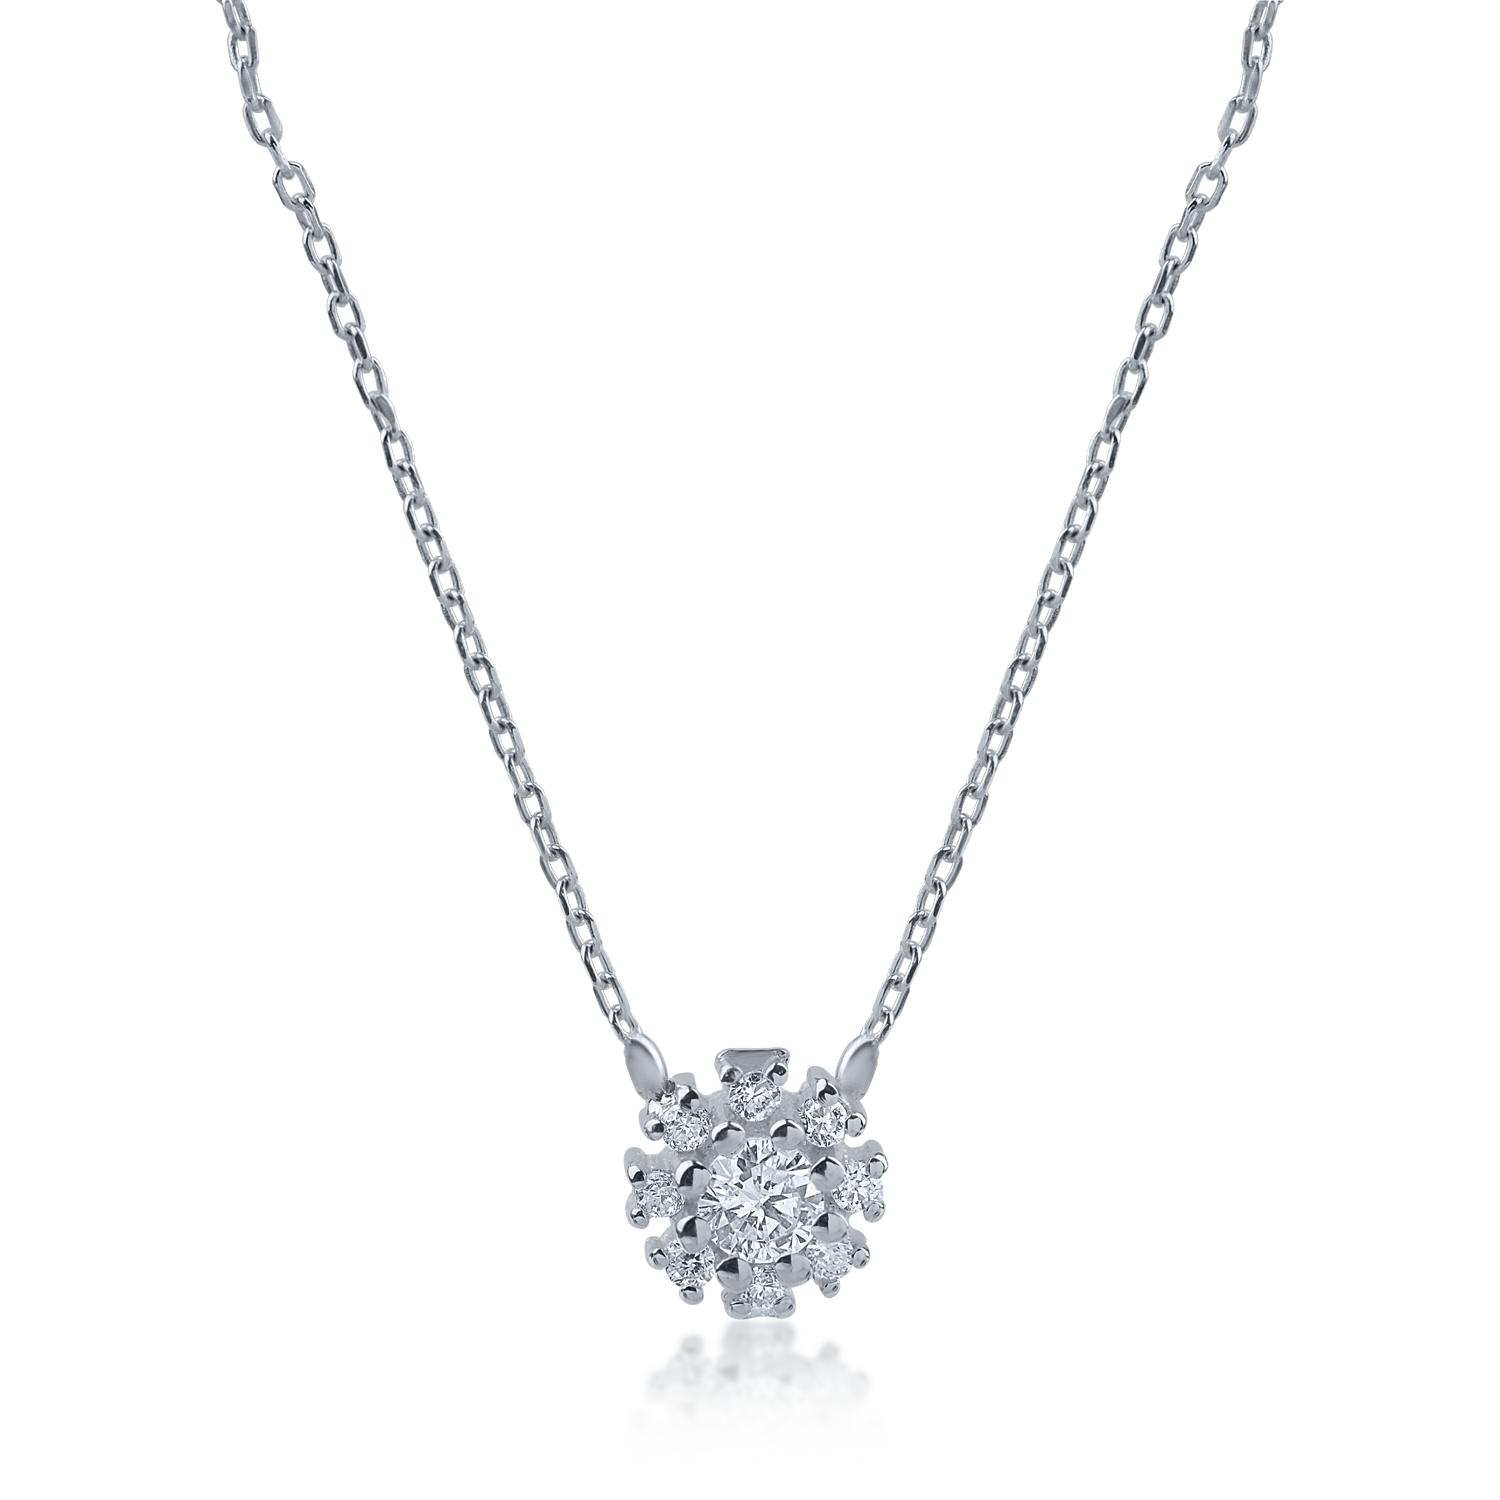 White gold pendant necklace with 0.07ct diamonds